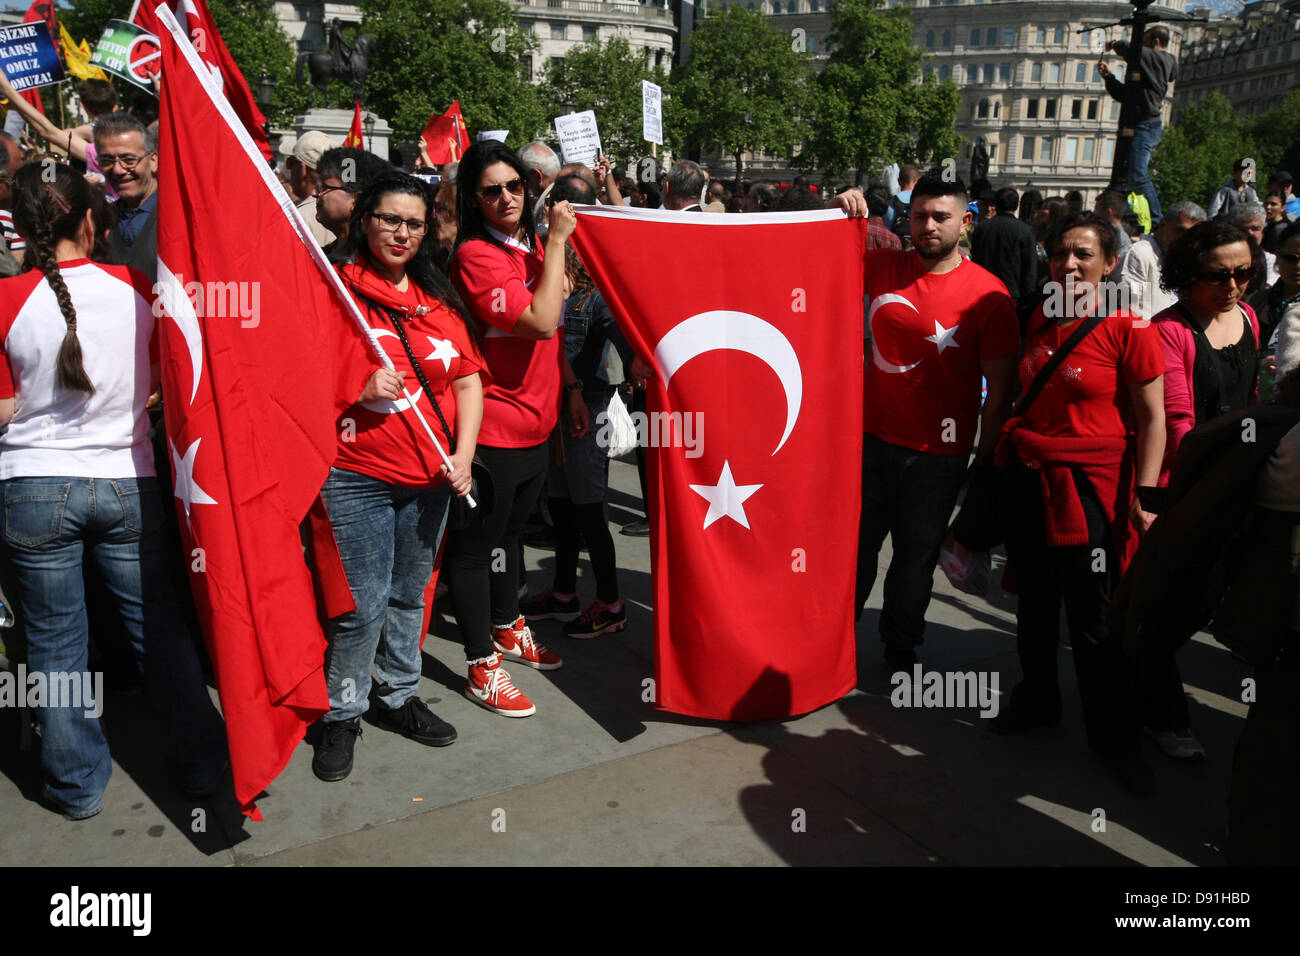 London, UK. 8th June 2013. Turkish people staged a large protest in Trafalgar Square against the Erdogan's government's response to the protest in Gazi   Credit:  Mario Mitsis / Alamy Live News Stock Photo